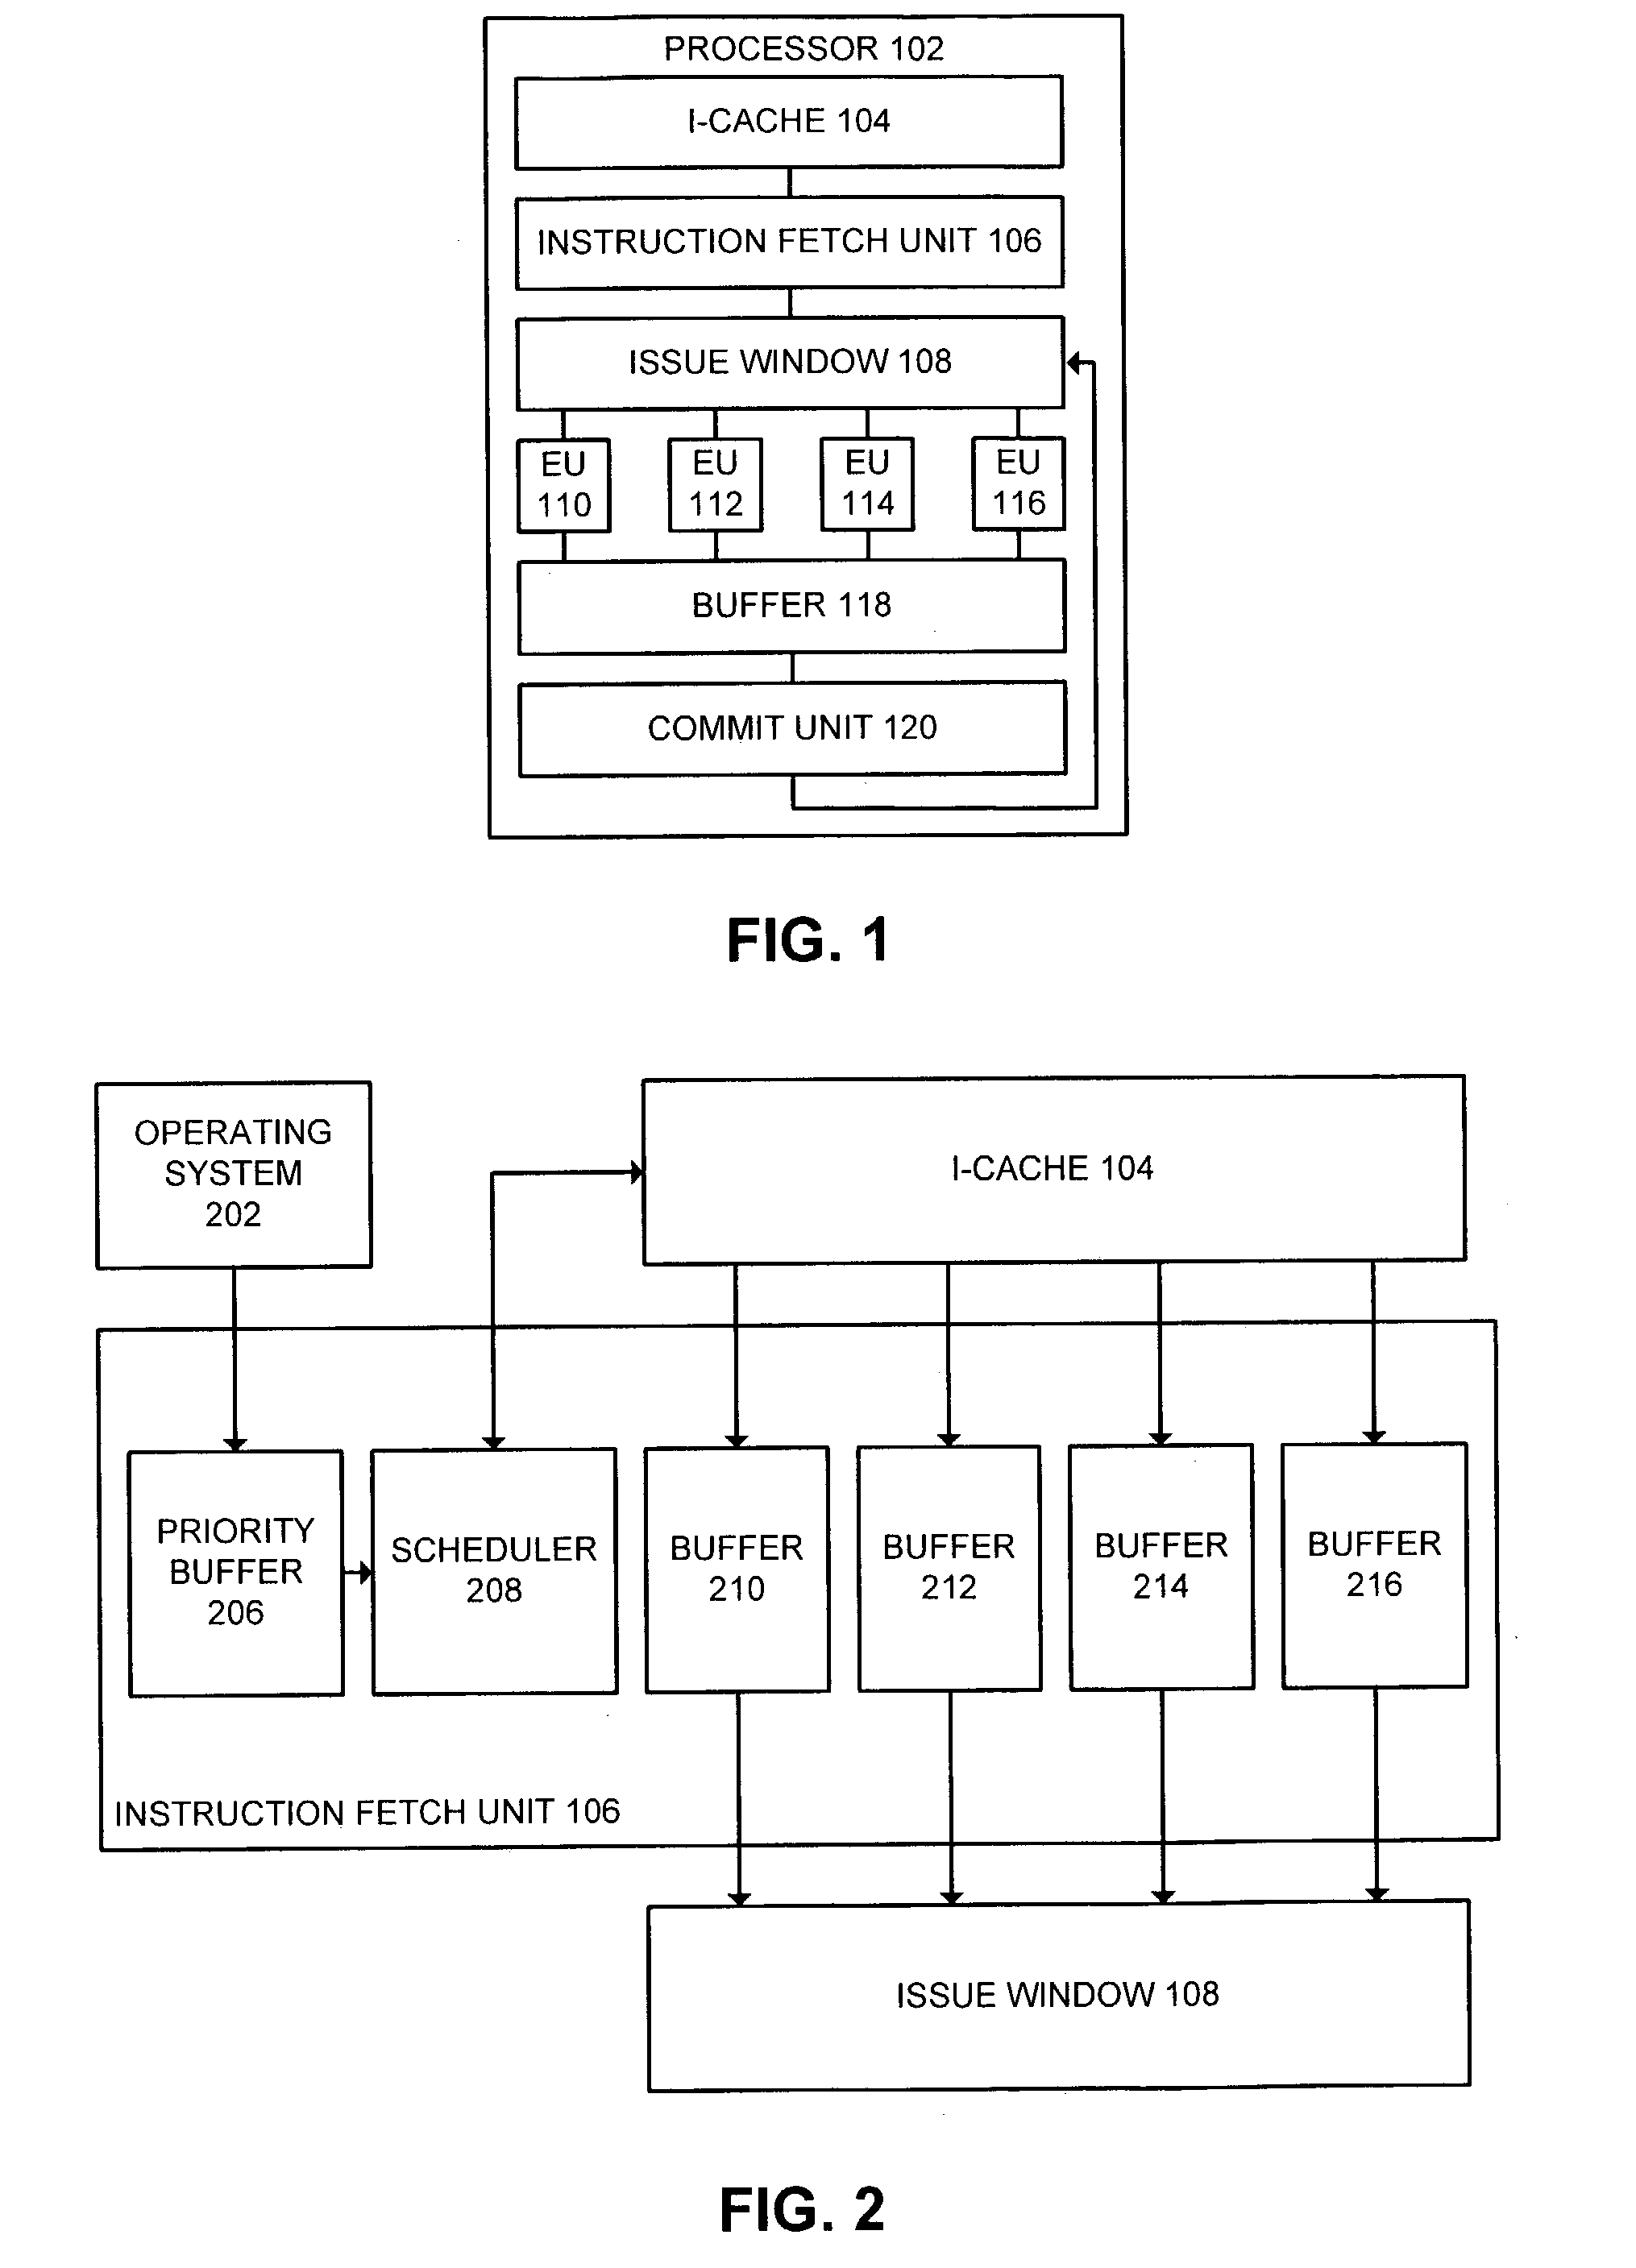 Method and apparatus for supporting asymmetric multi-threading in a computer system